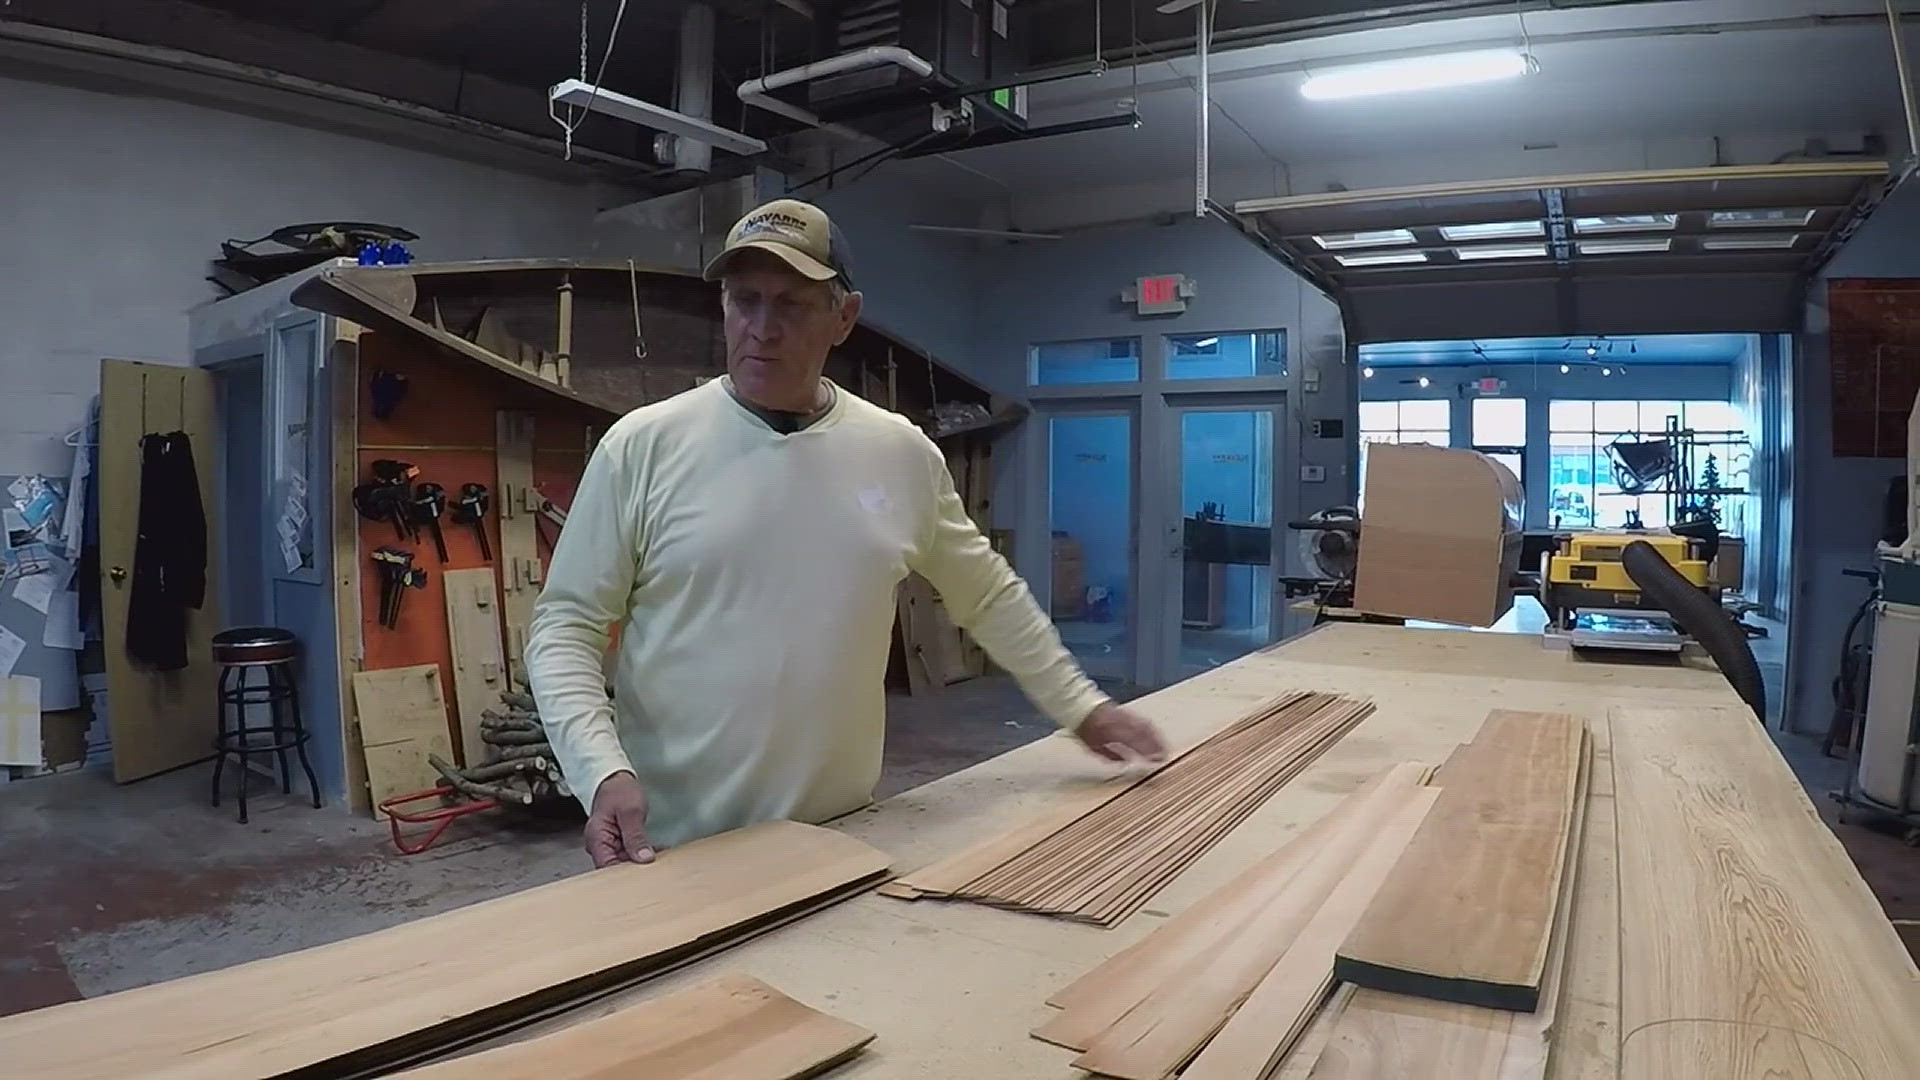 Jeff O'Hern spent his whole life around boats. Then two years ago, he started making them. You can get a BTS look at Navarro's 'Meet The Maker' event April 20-21.